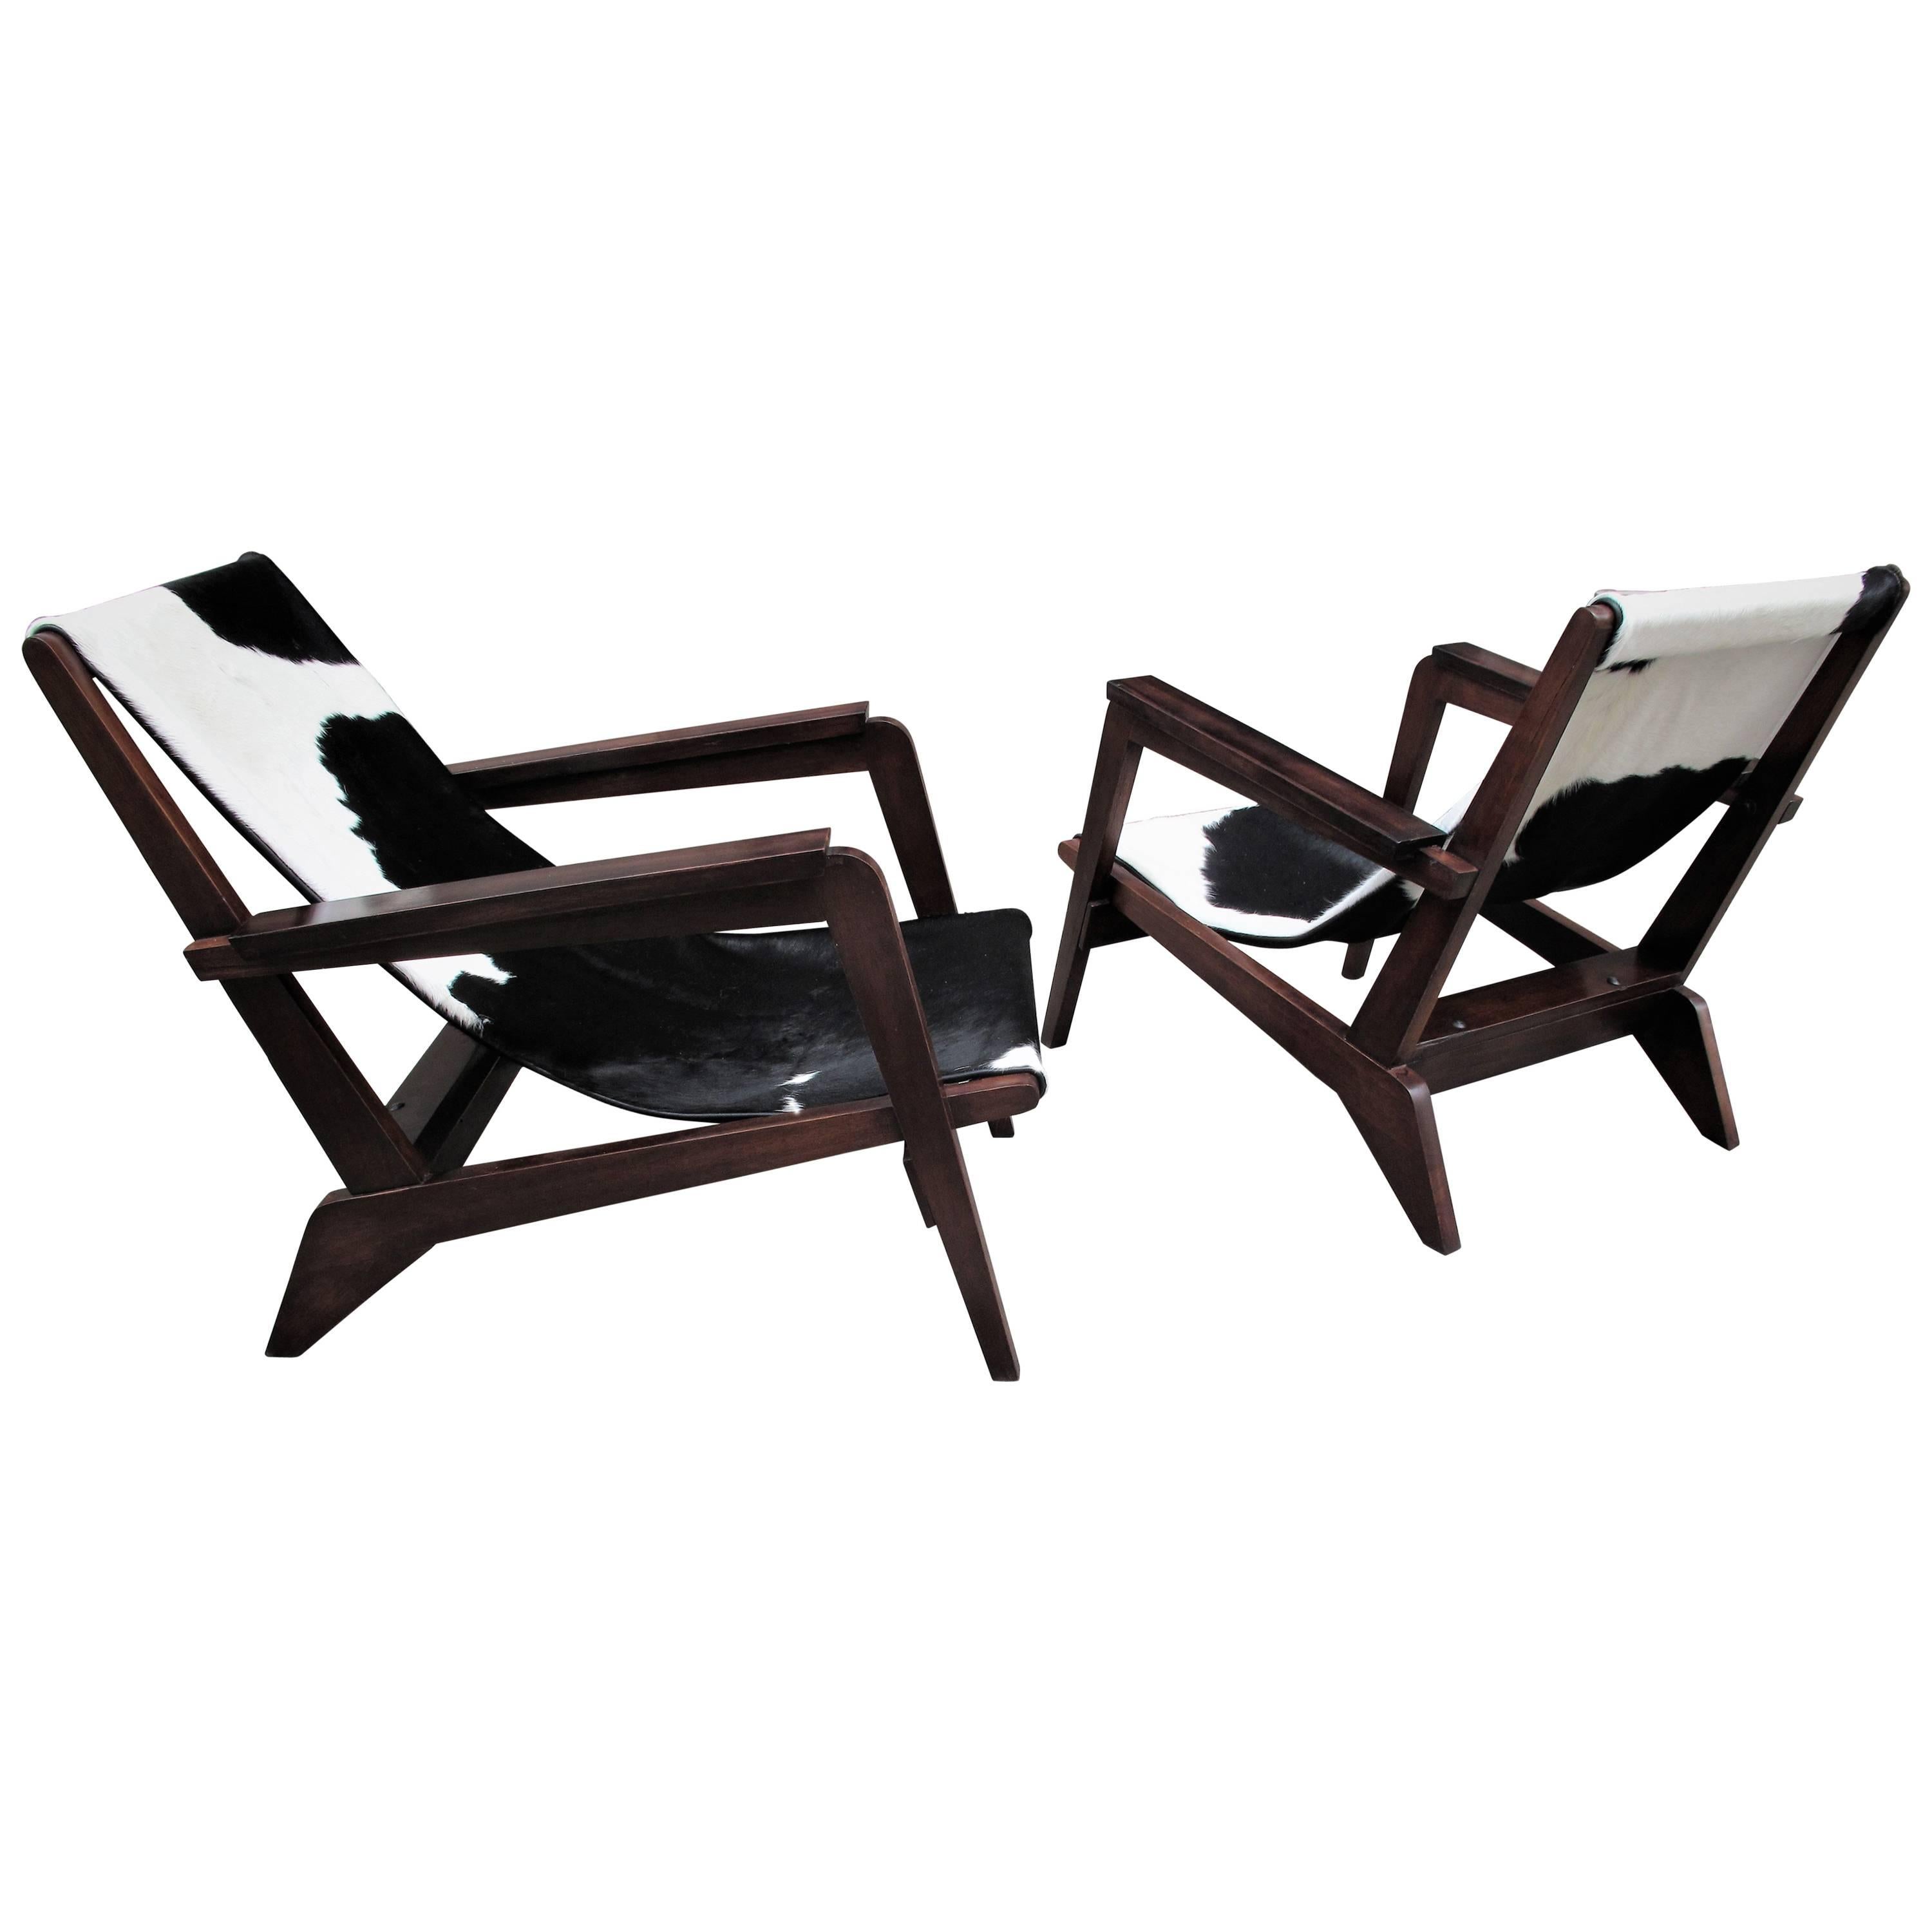 Pierre Jeanneret Style of Armchairs Design 1940 Grenoble For Sale